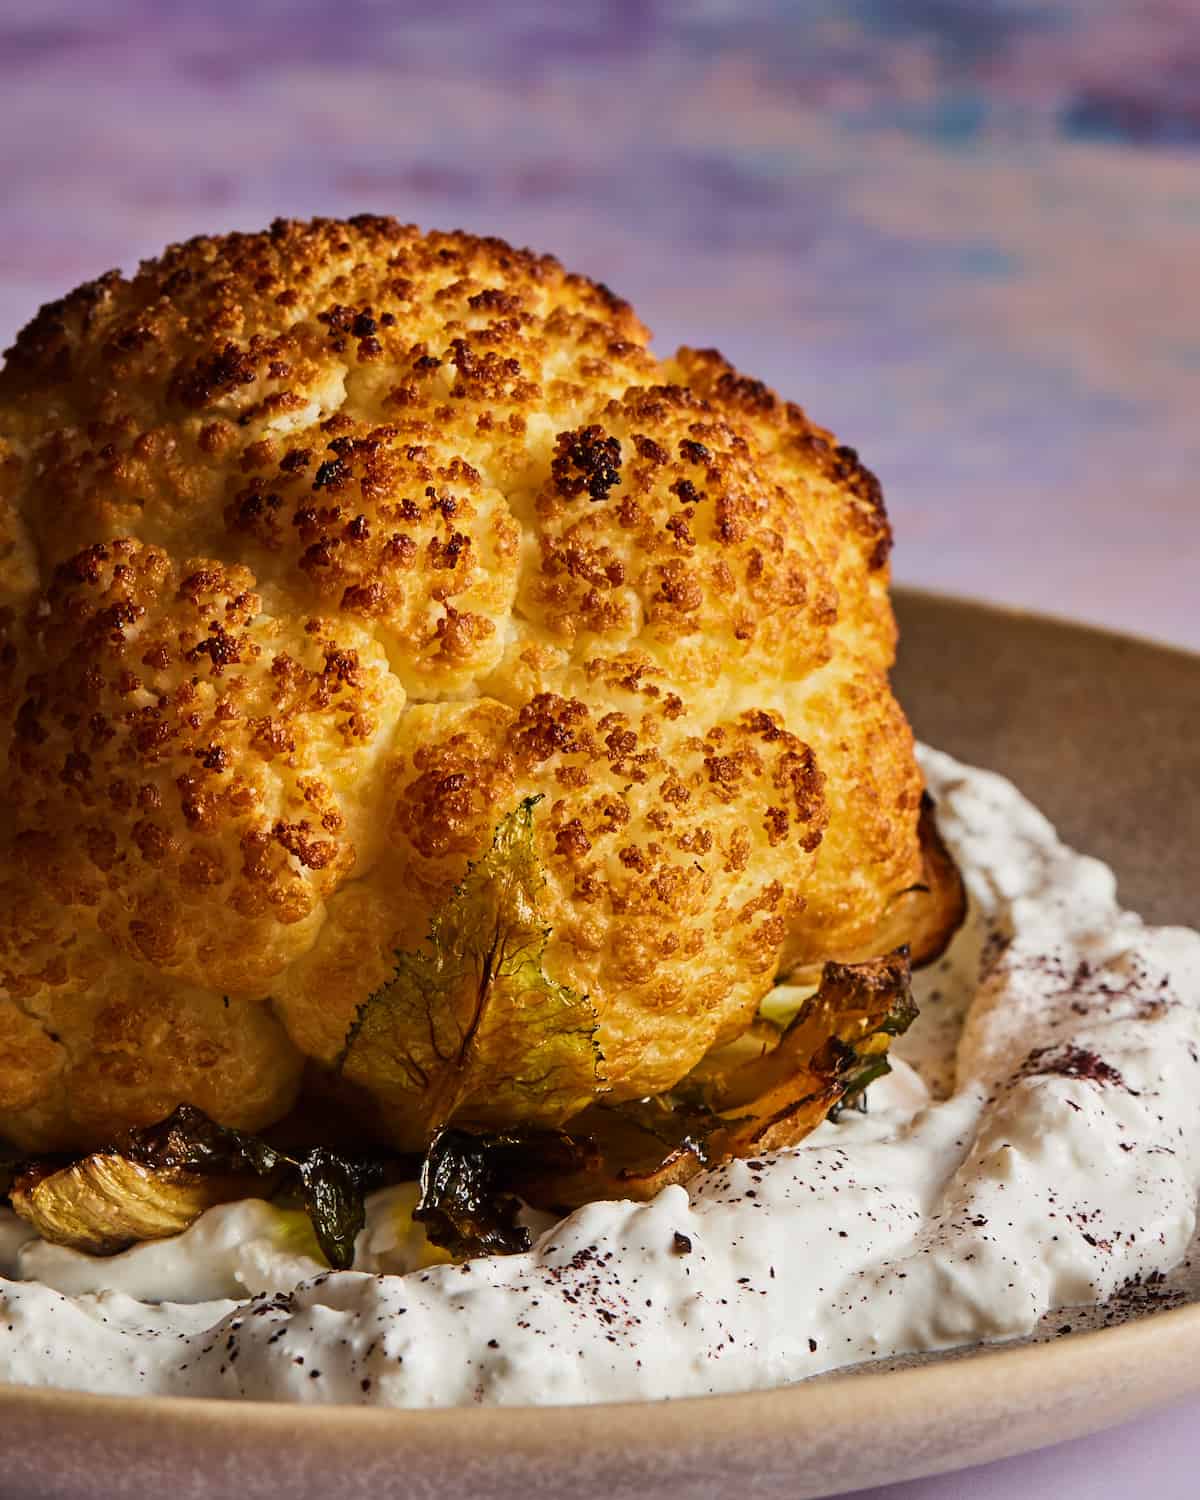 A close up shot of a whole roasted cauliflower placed in a bed of labneh in a beige ceramic platter.